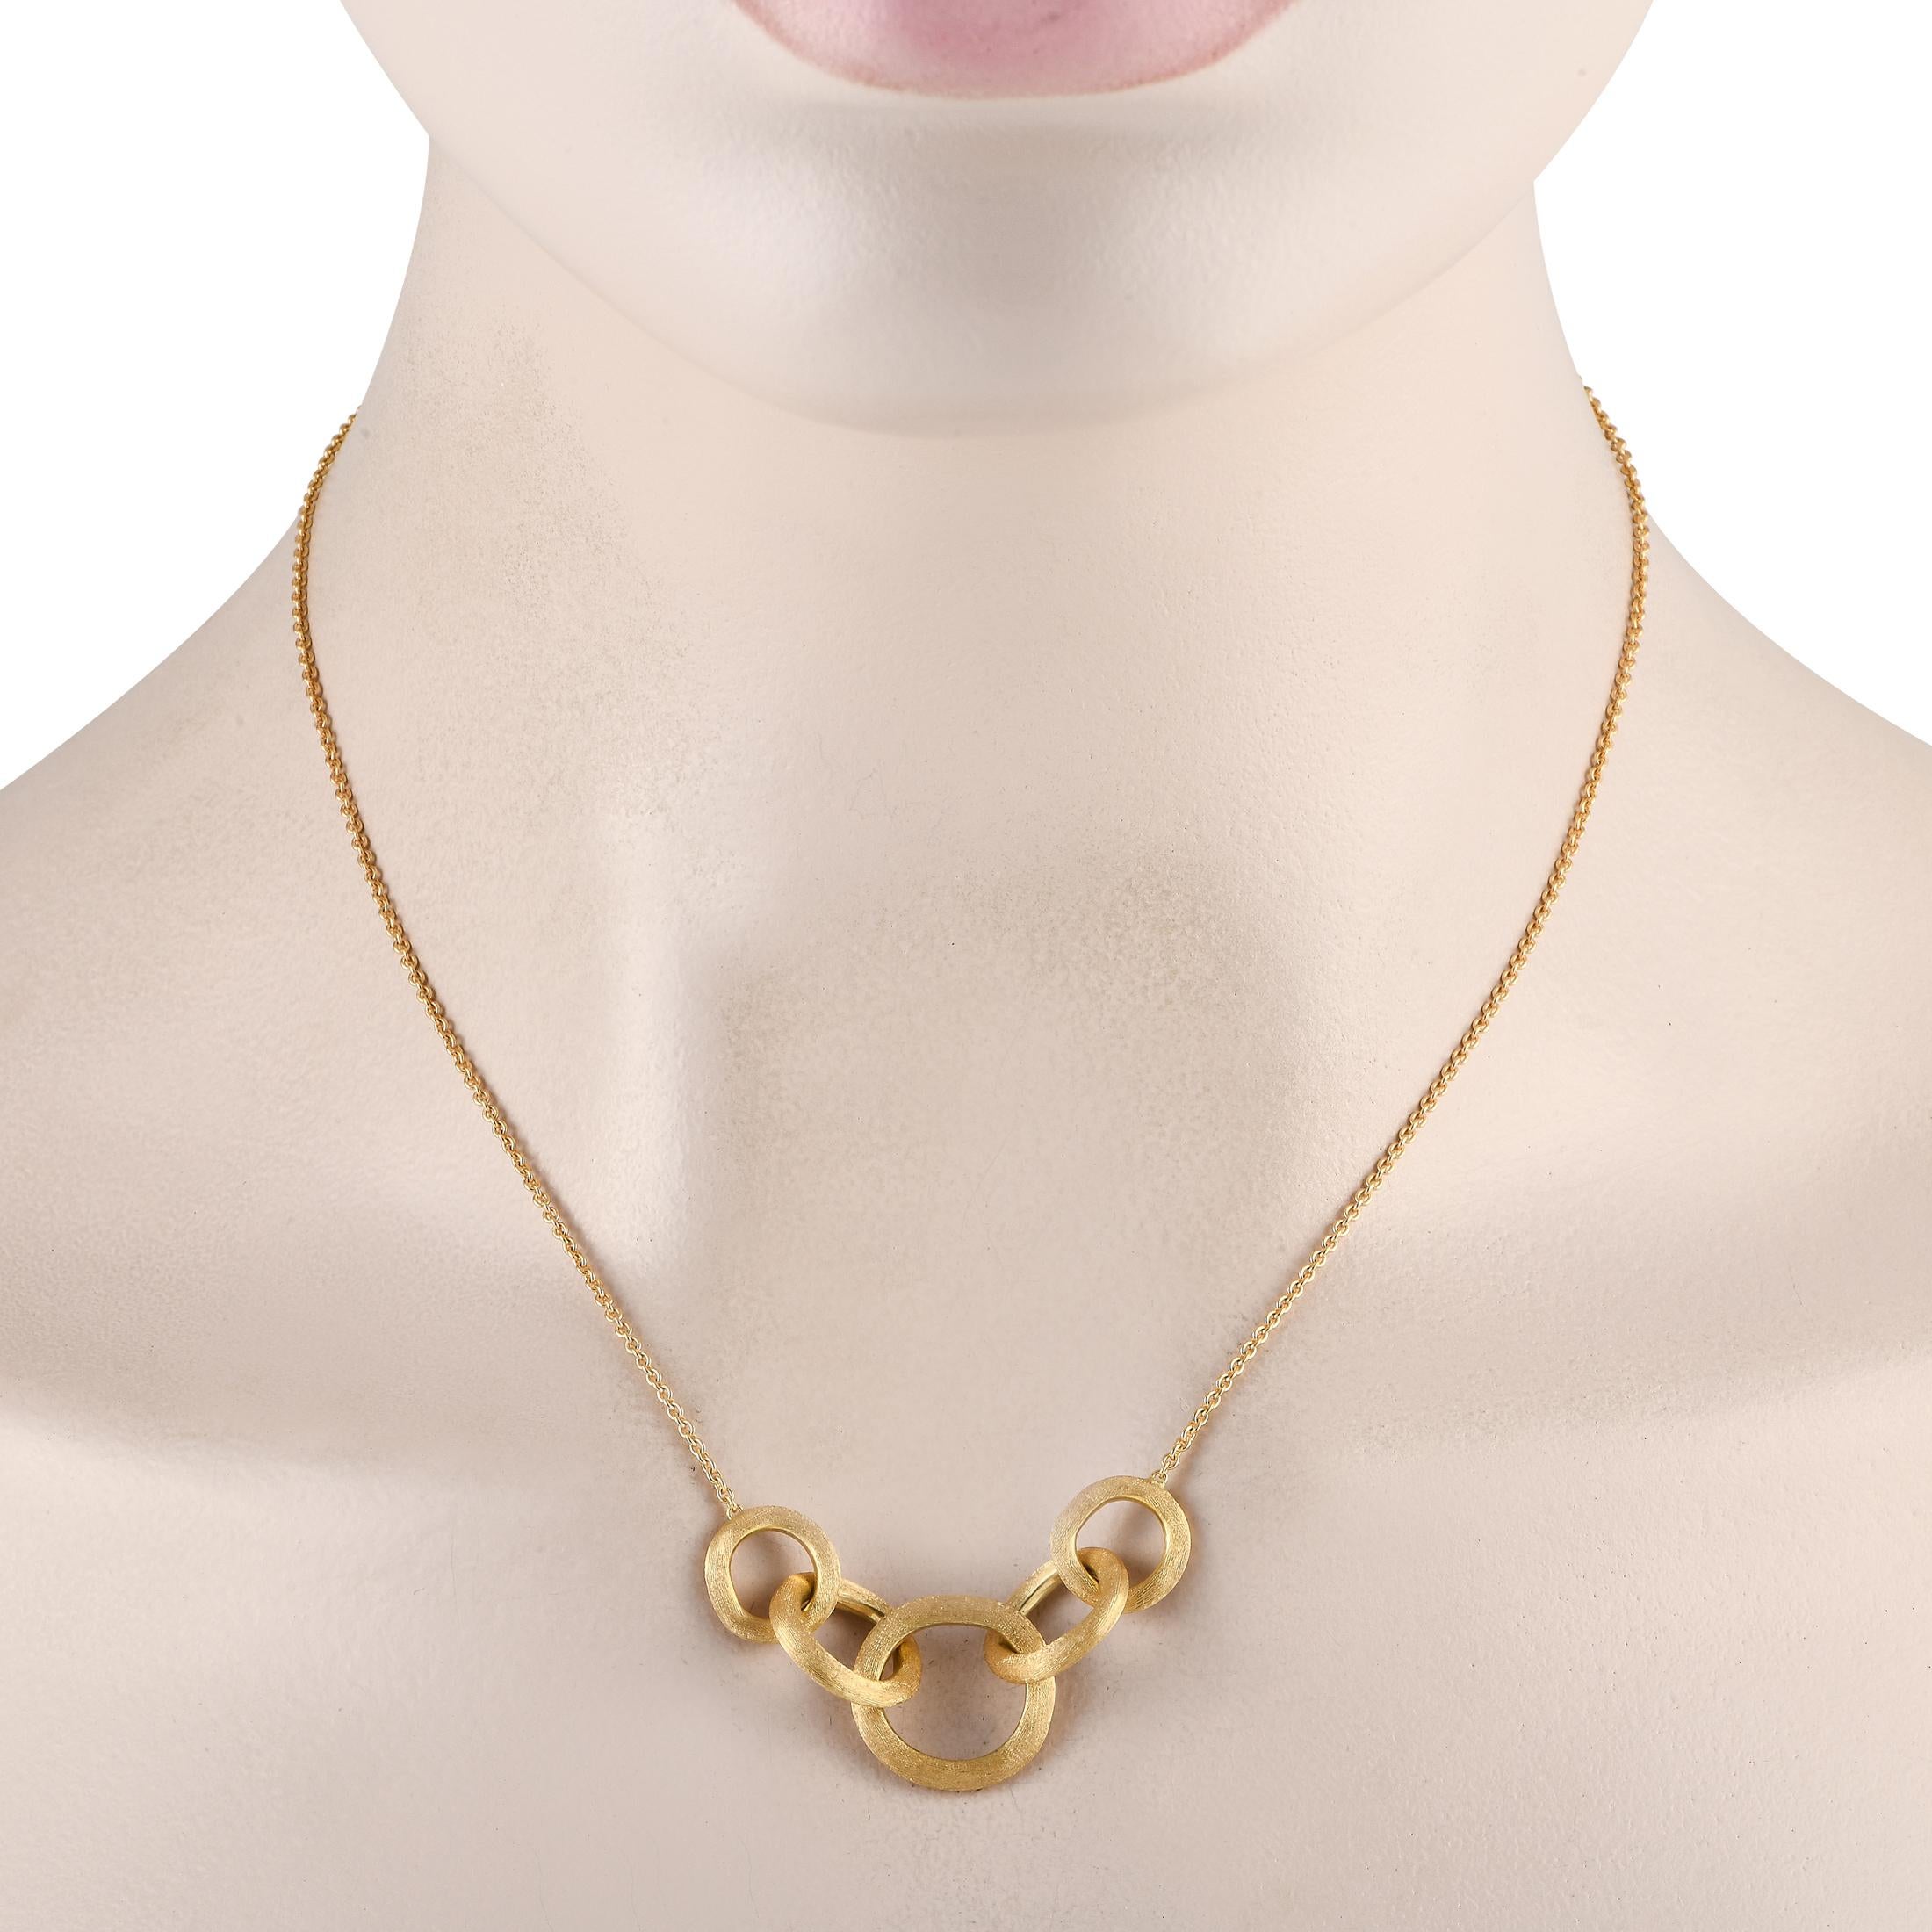 Interlocking circles make a statement at the center of a 16 chain on this impressive Marco Bicego Jaipur necklace. Simple, understated, and elegant in design, the 18K Yellow Gold has been engraved by hand to create a silk-like brushed finish.This